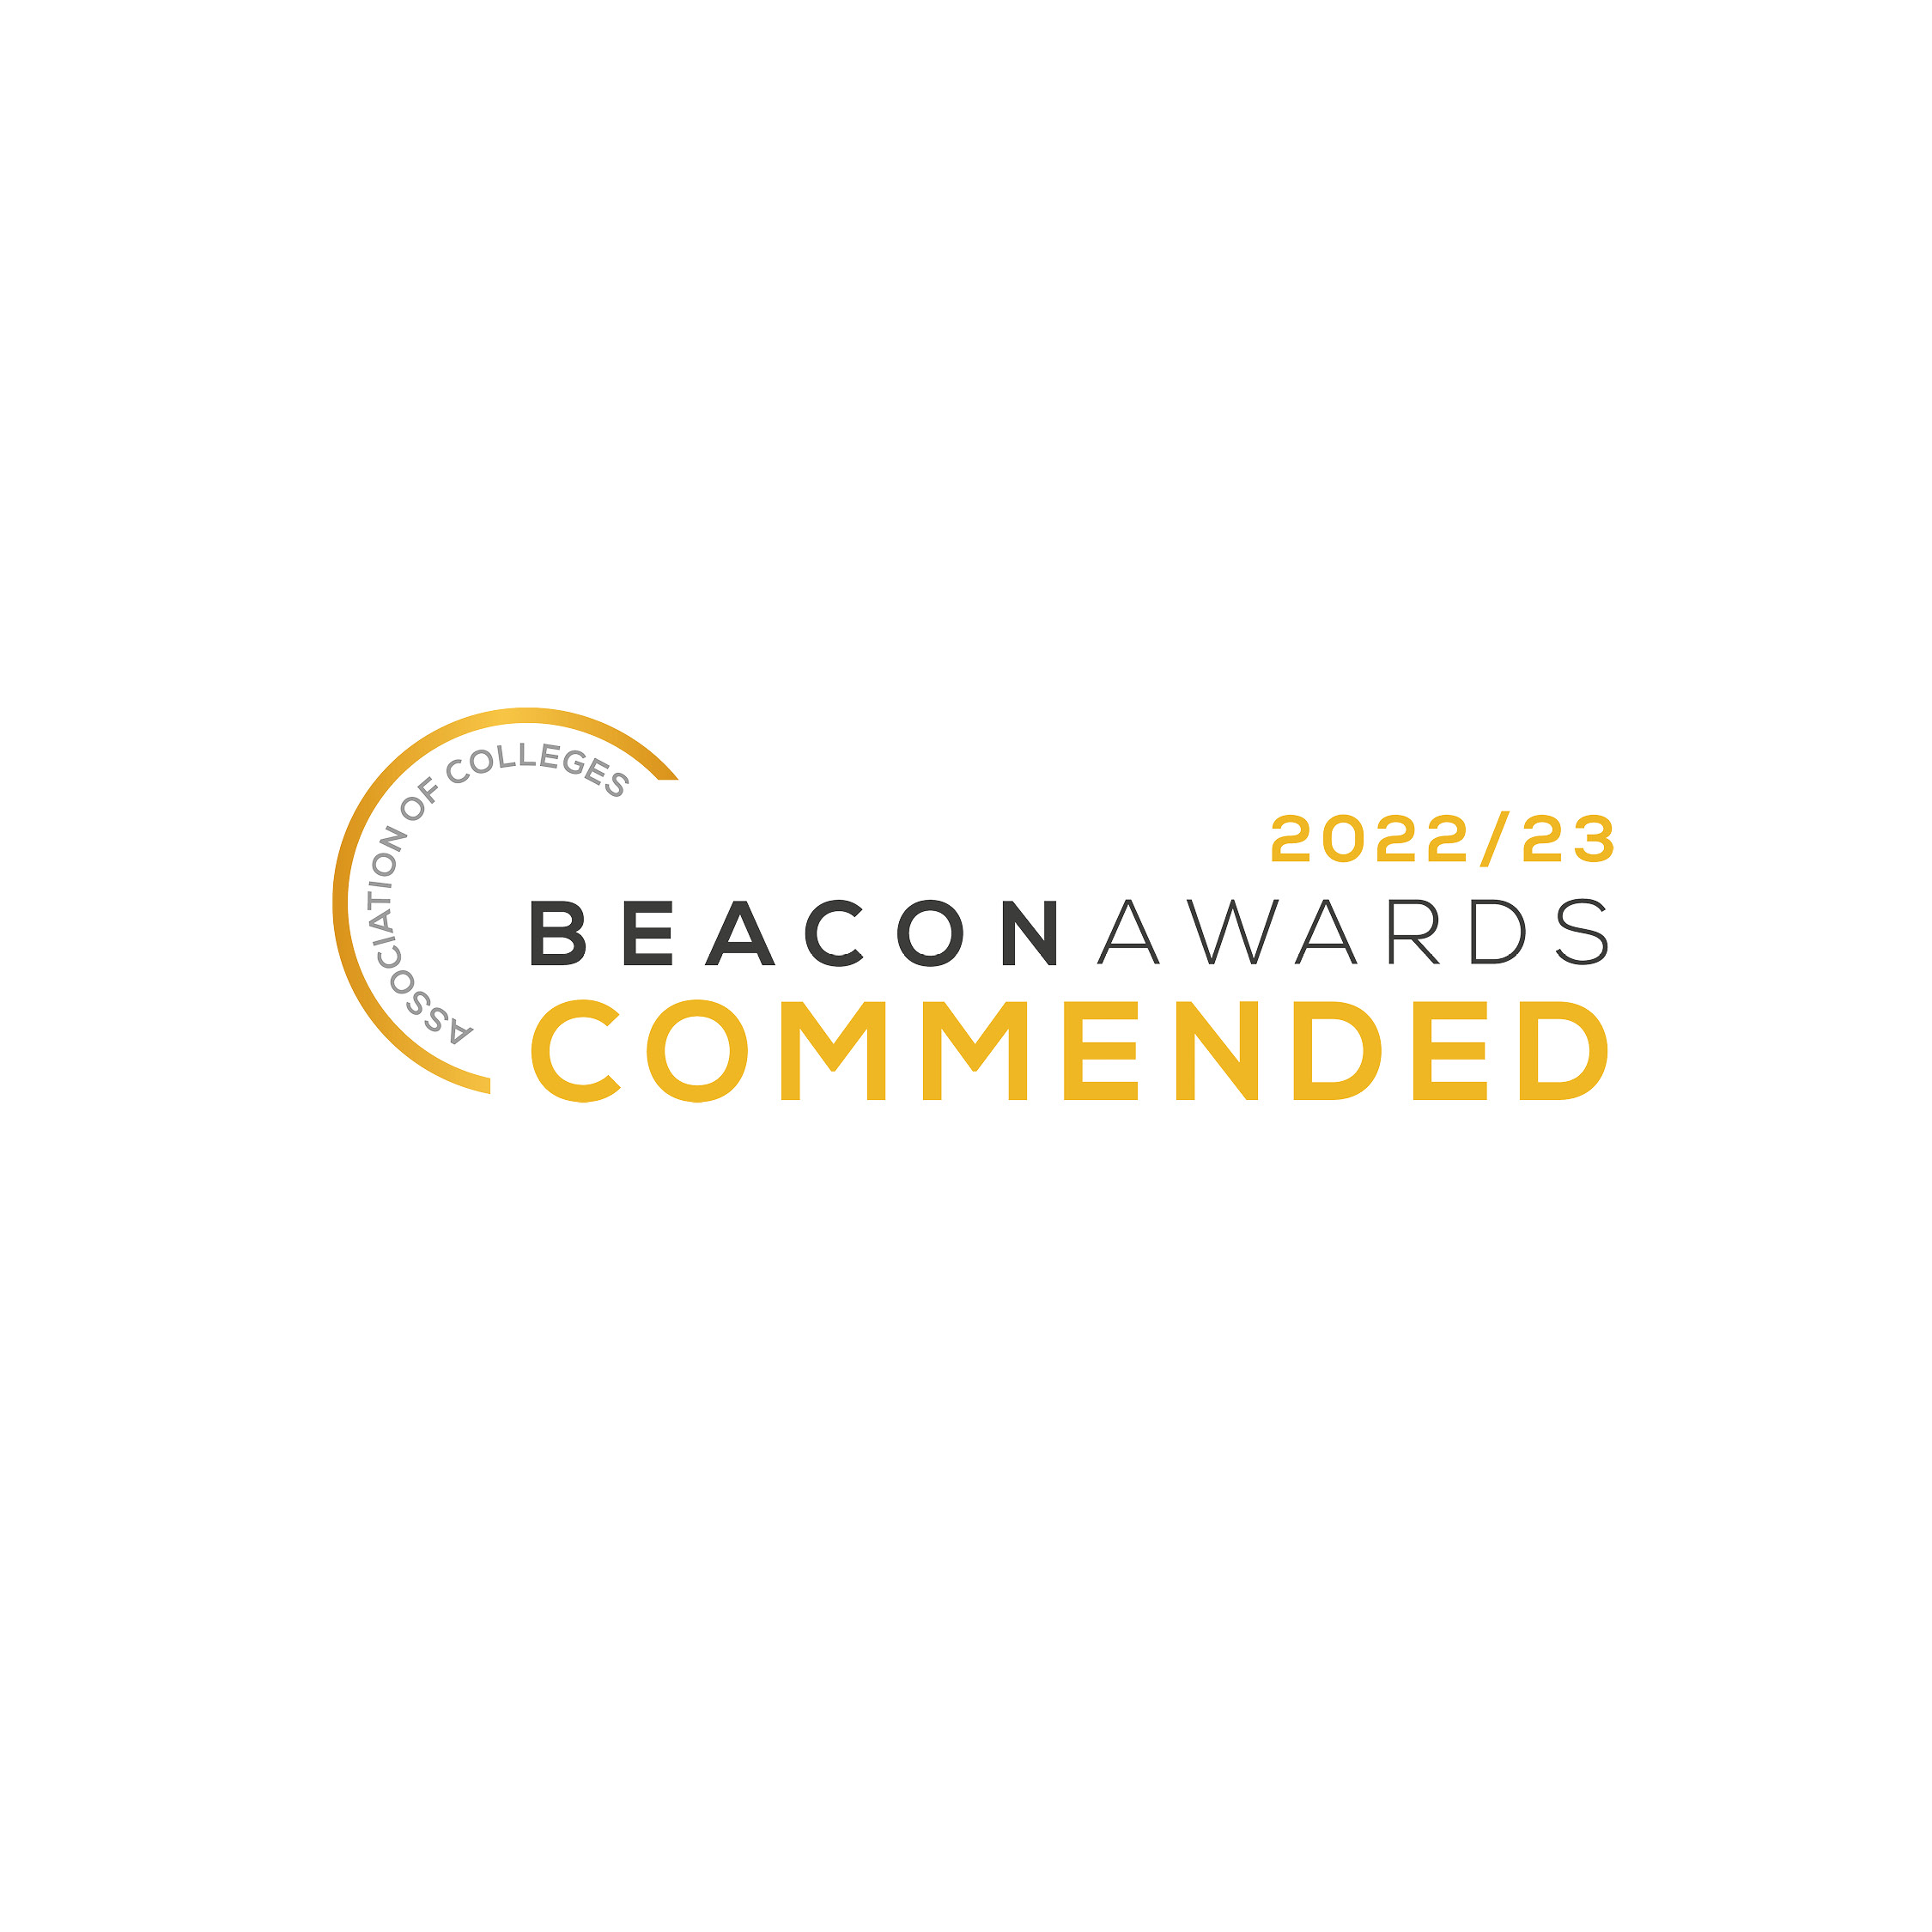 Beacon awards logo and list of nominated colleges